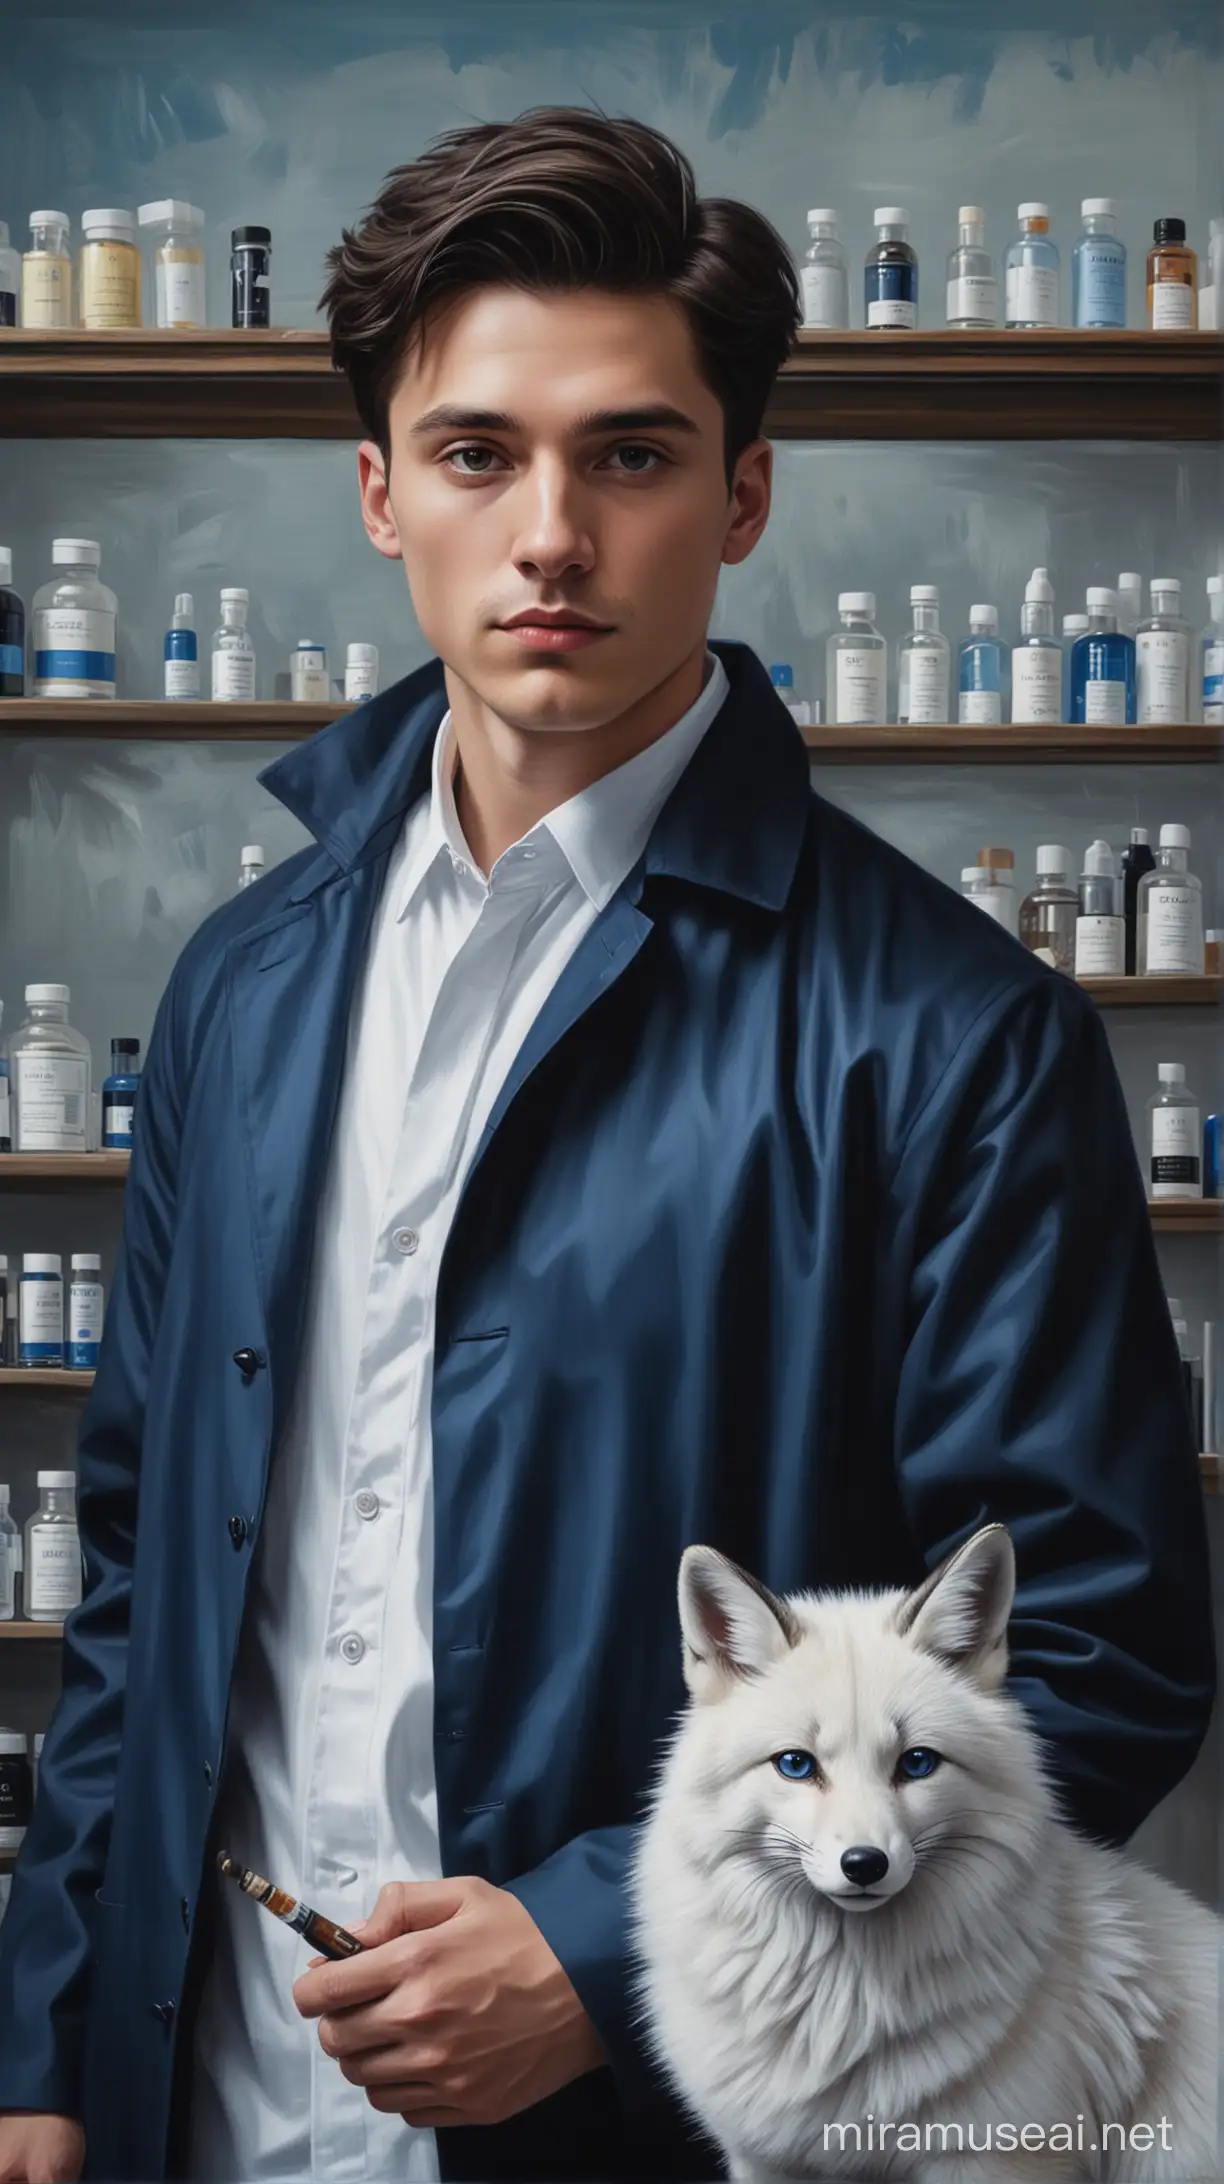 Pharmacy Student in Contemplation Realistic Oil Painting with Blue Coat and White Fox Background